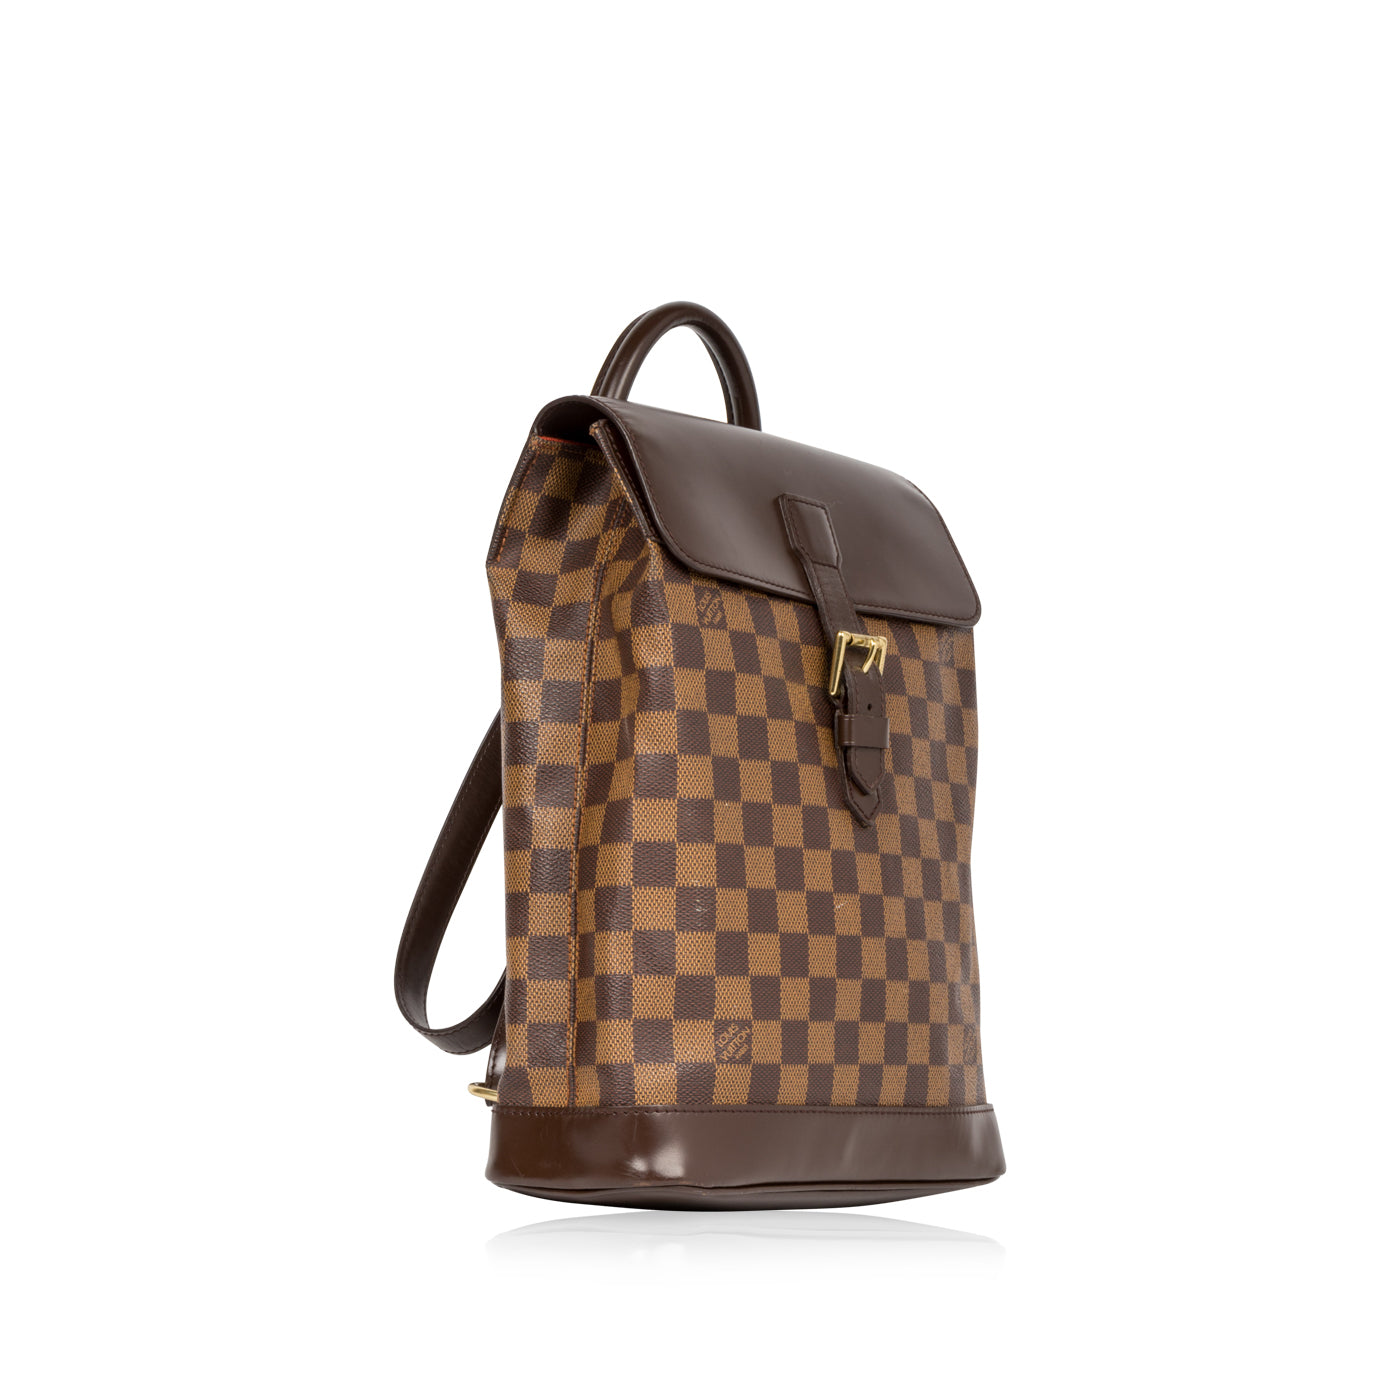 Louis Vuitton Soho Backpack in Ebene Damier Canvas and Brown